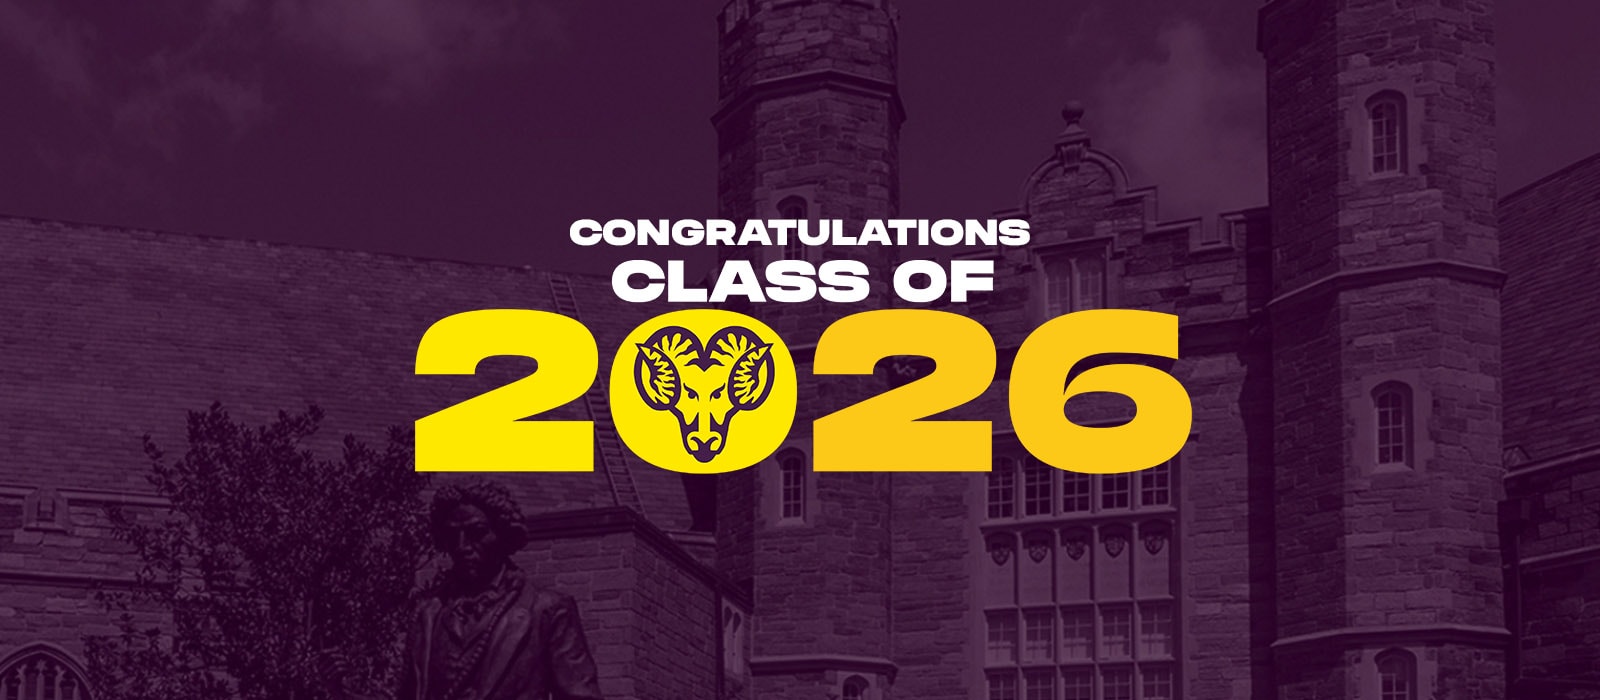 Congratulations to the Class of 2026!